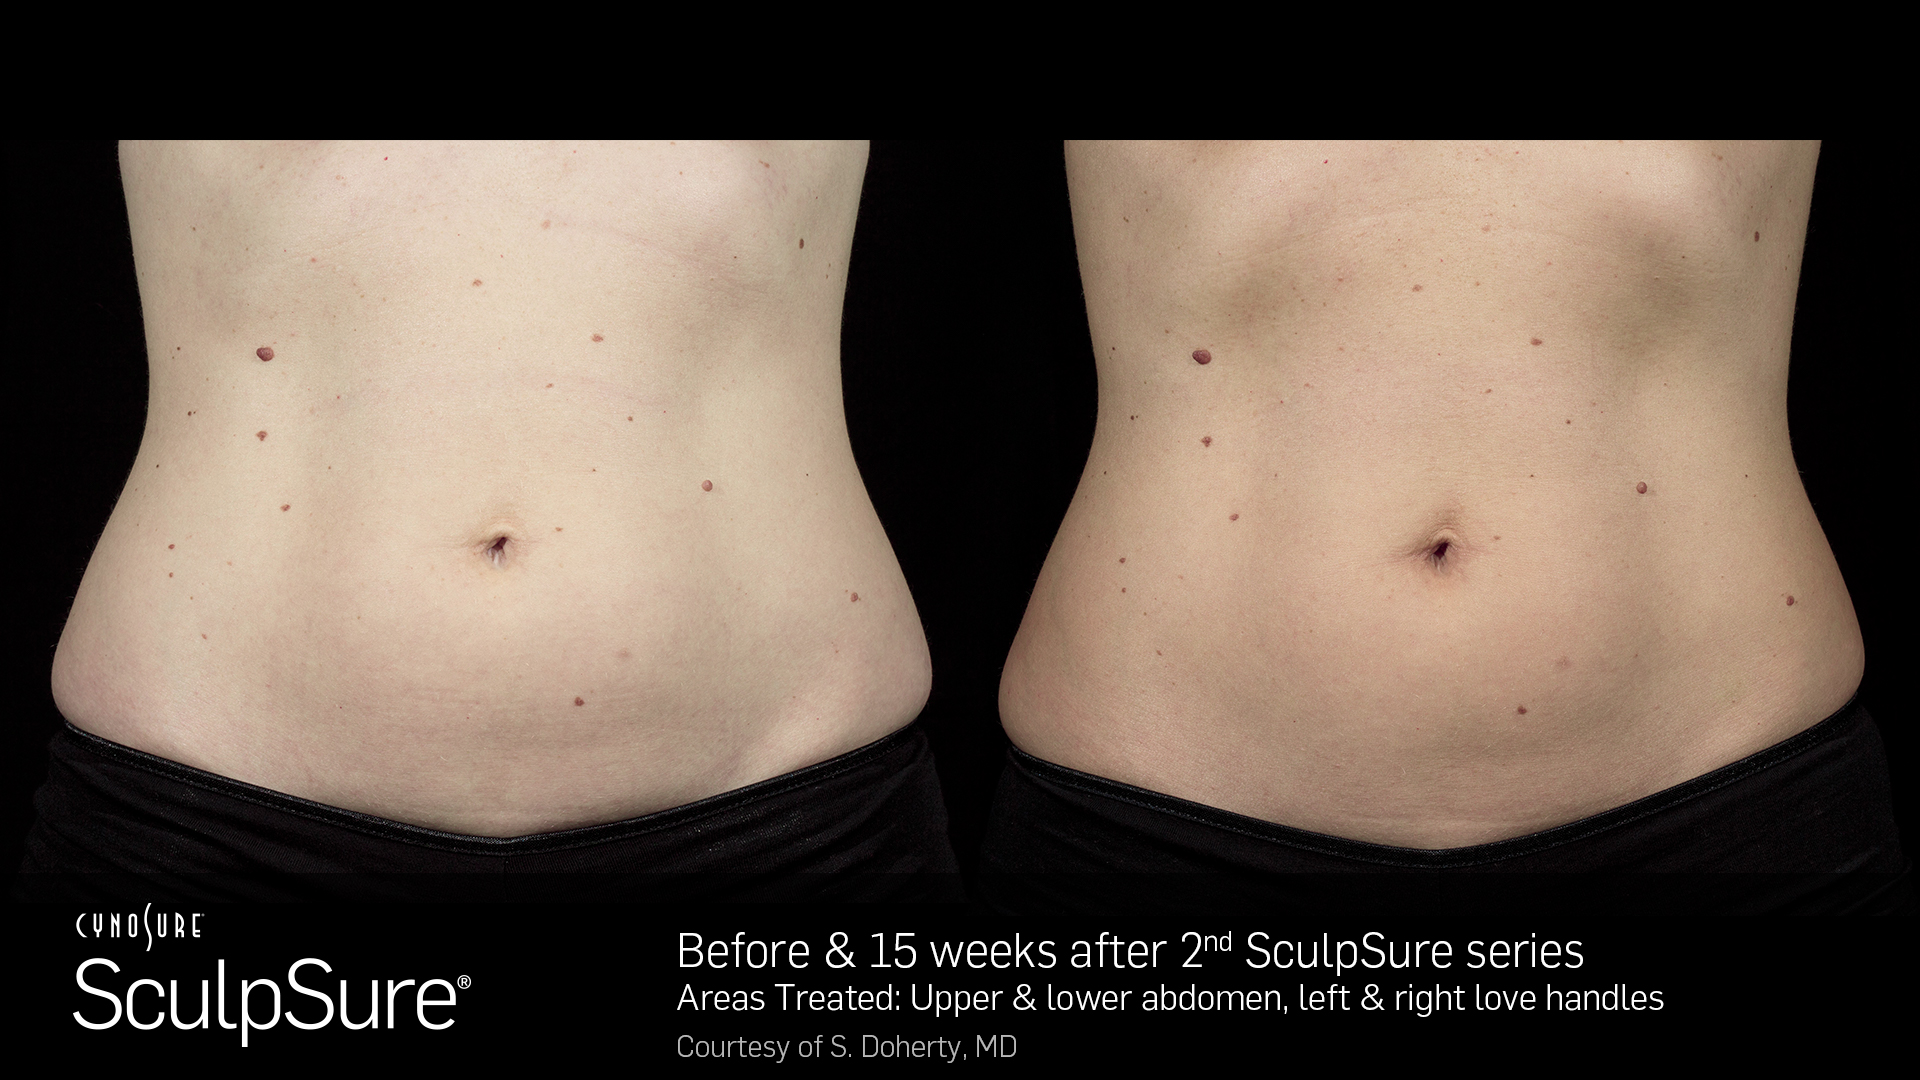 Before and after SculpSure